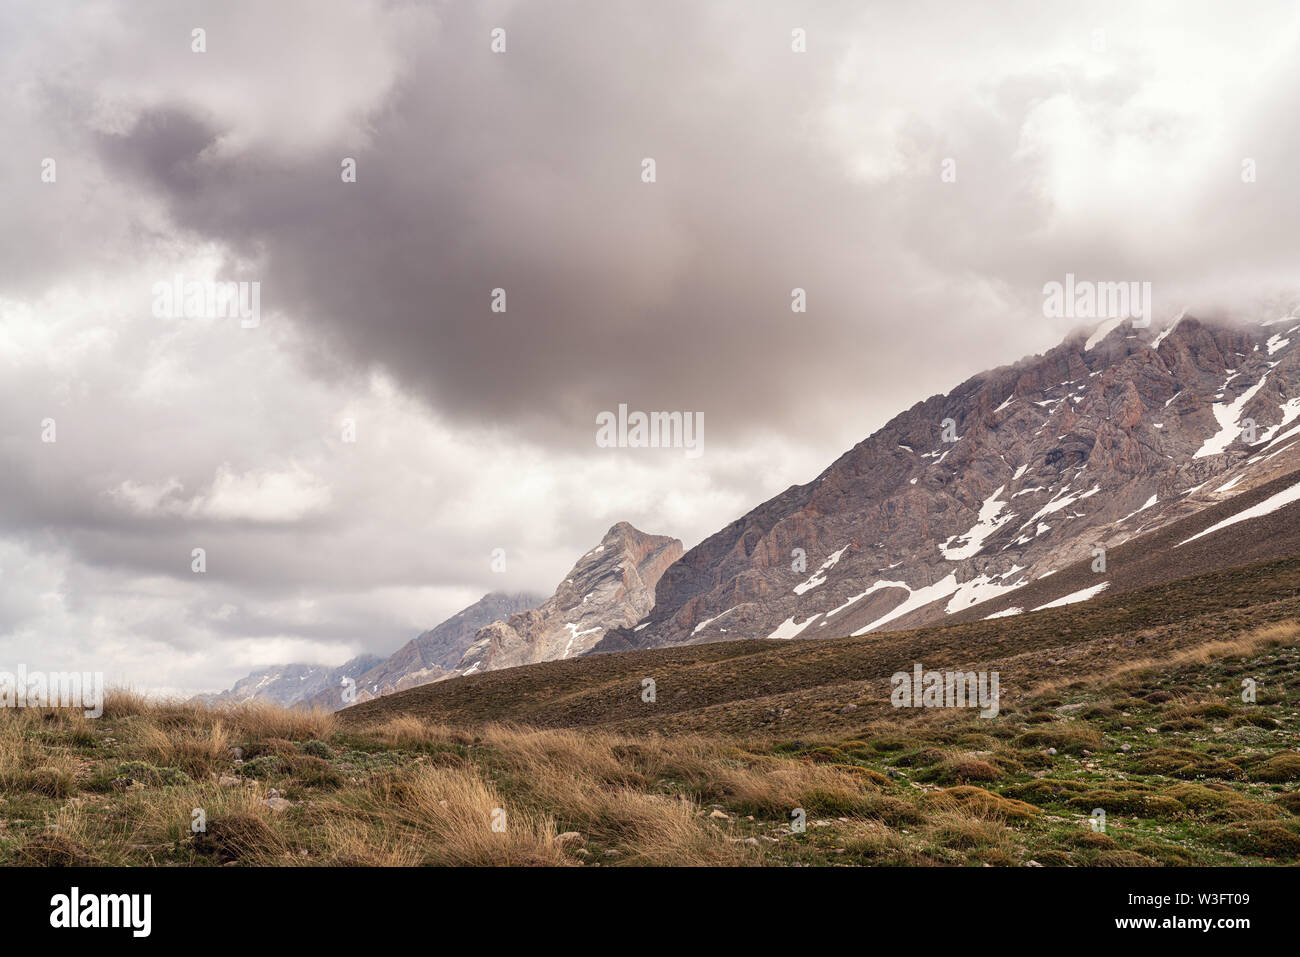 Snowy Mountain With Cloudy Sky In The Background Stock Photo